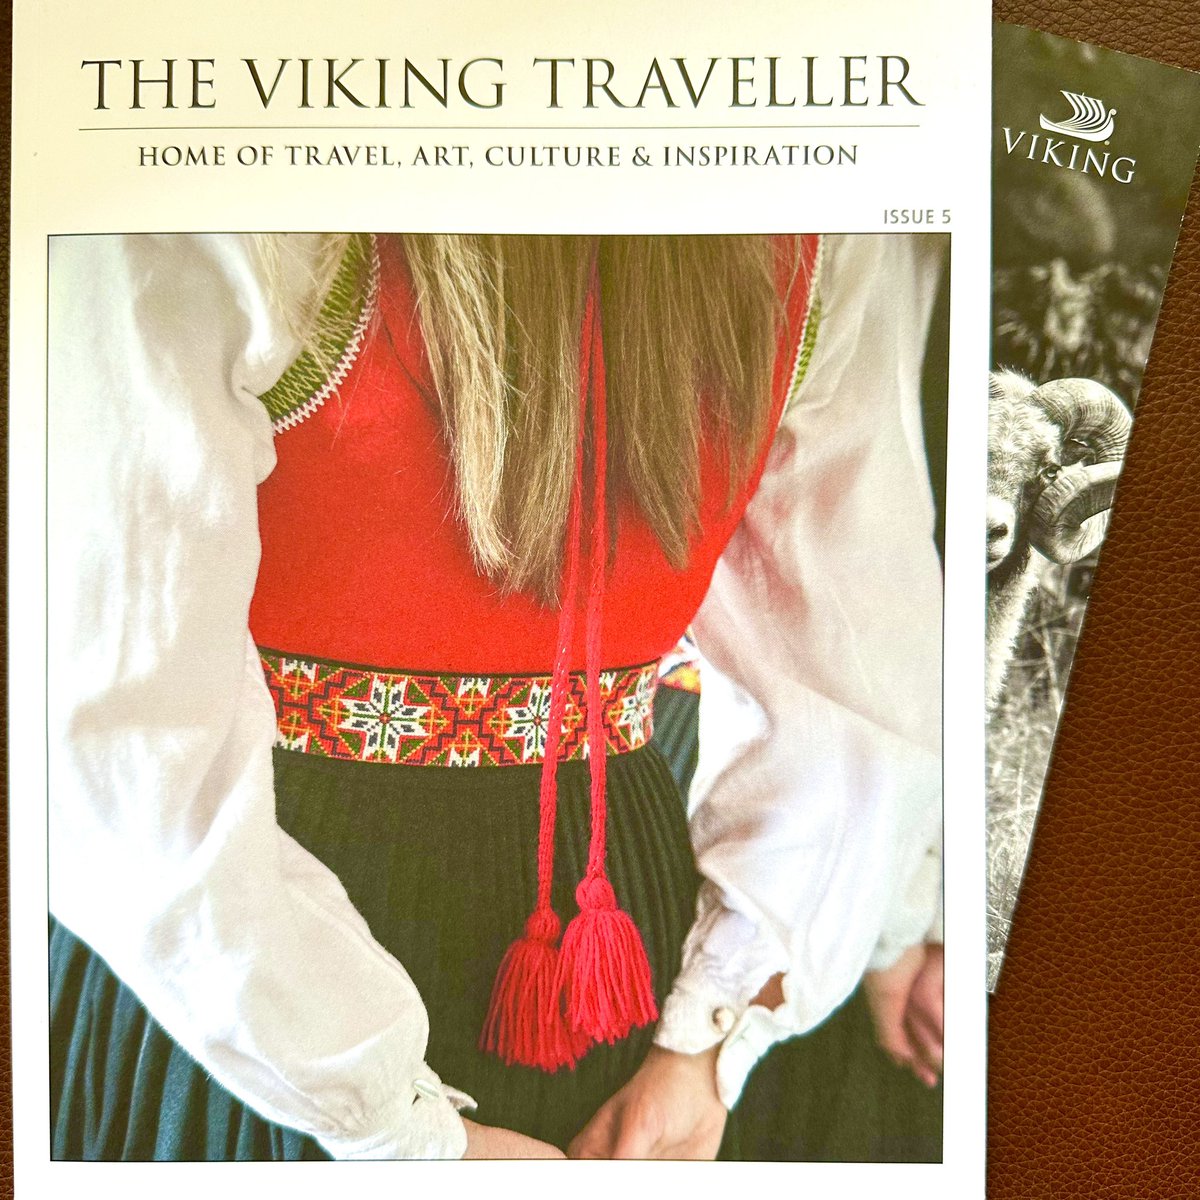 When you miss being on board a @VikingCruises ship & the post brings the latest edition of ‘The Viking Traveler’ magazine. Getting ready to bookmark my favourite section - but can’t choose which one they are all so inspiring 📖
 #fabulousread  #cruisemagazine 
#Vikingcruises